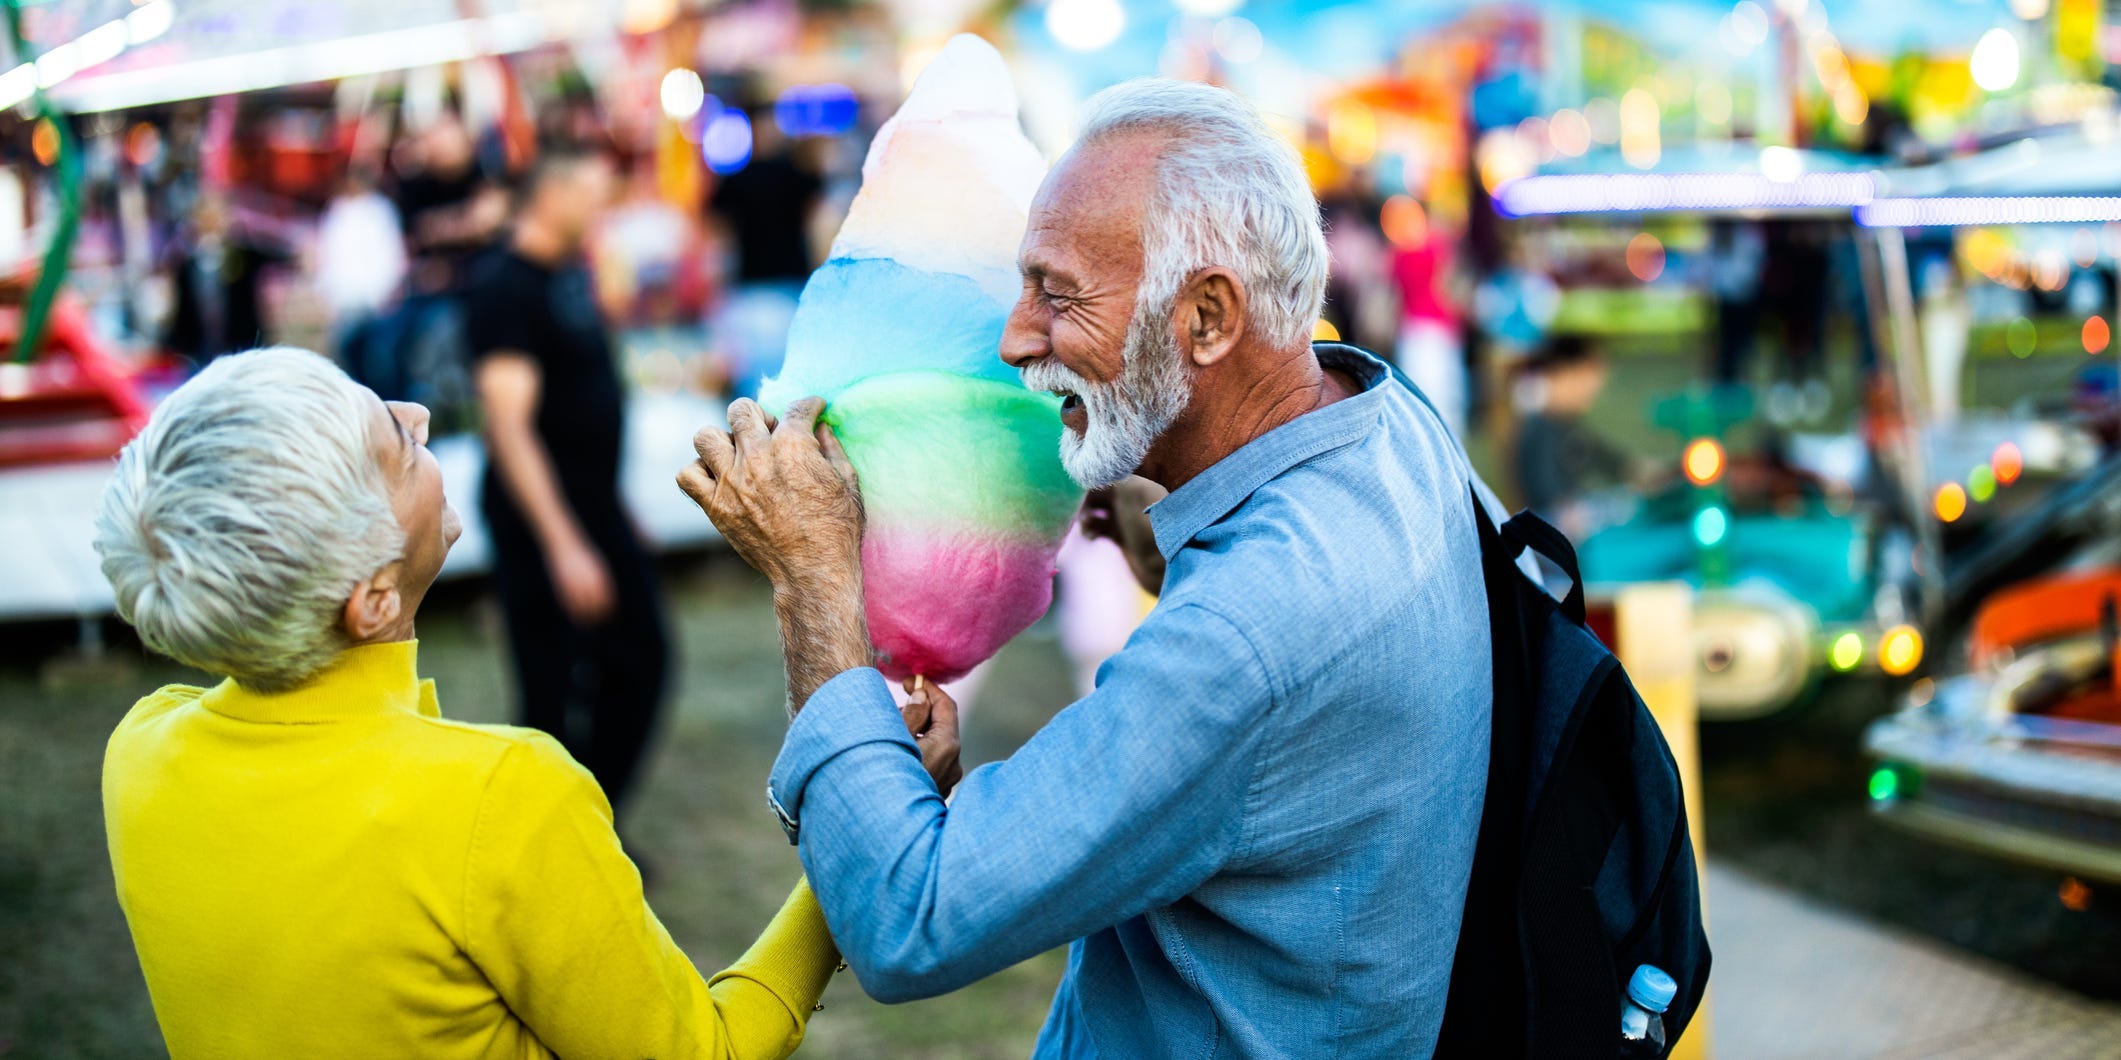 A couple at a carnival shares cotton candy.